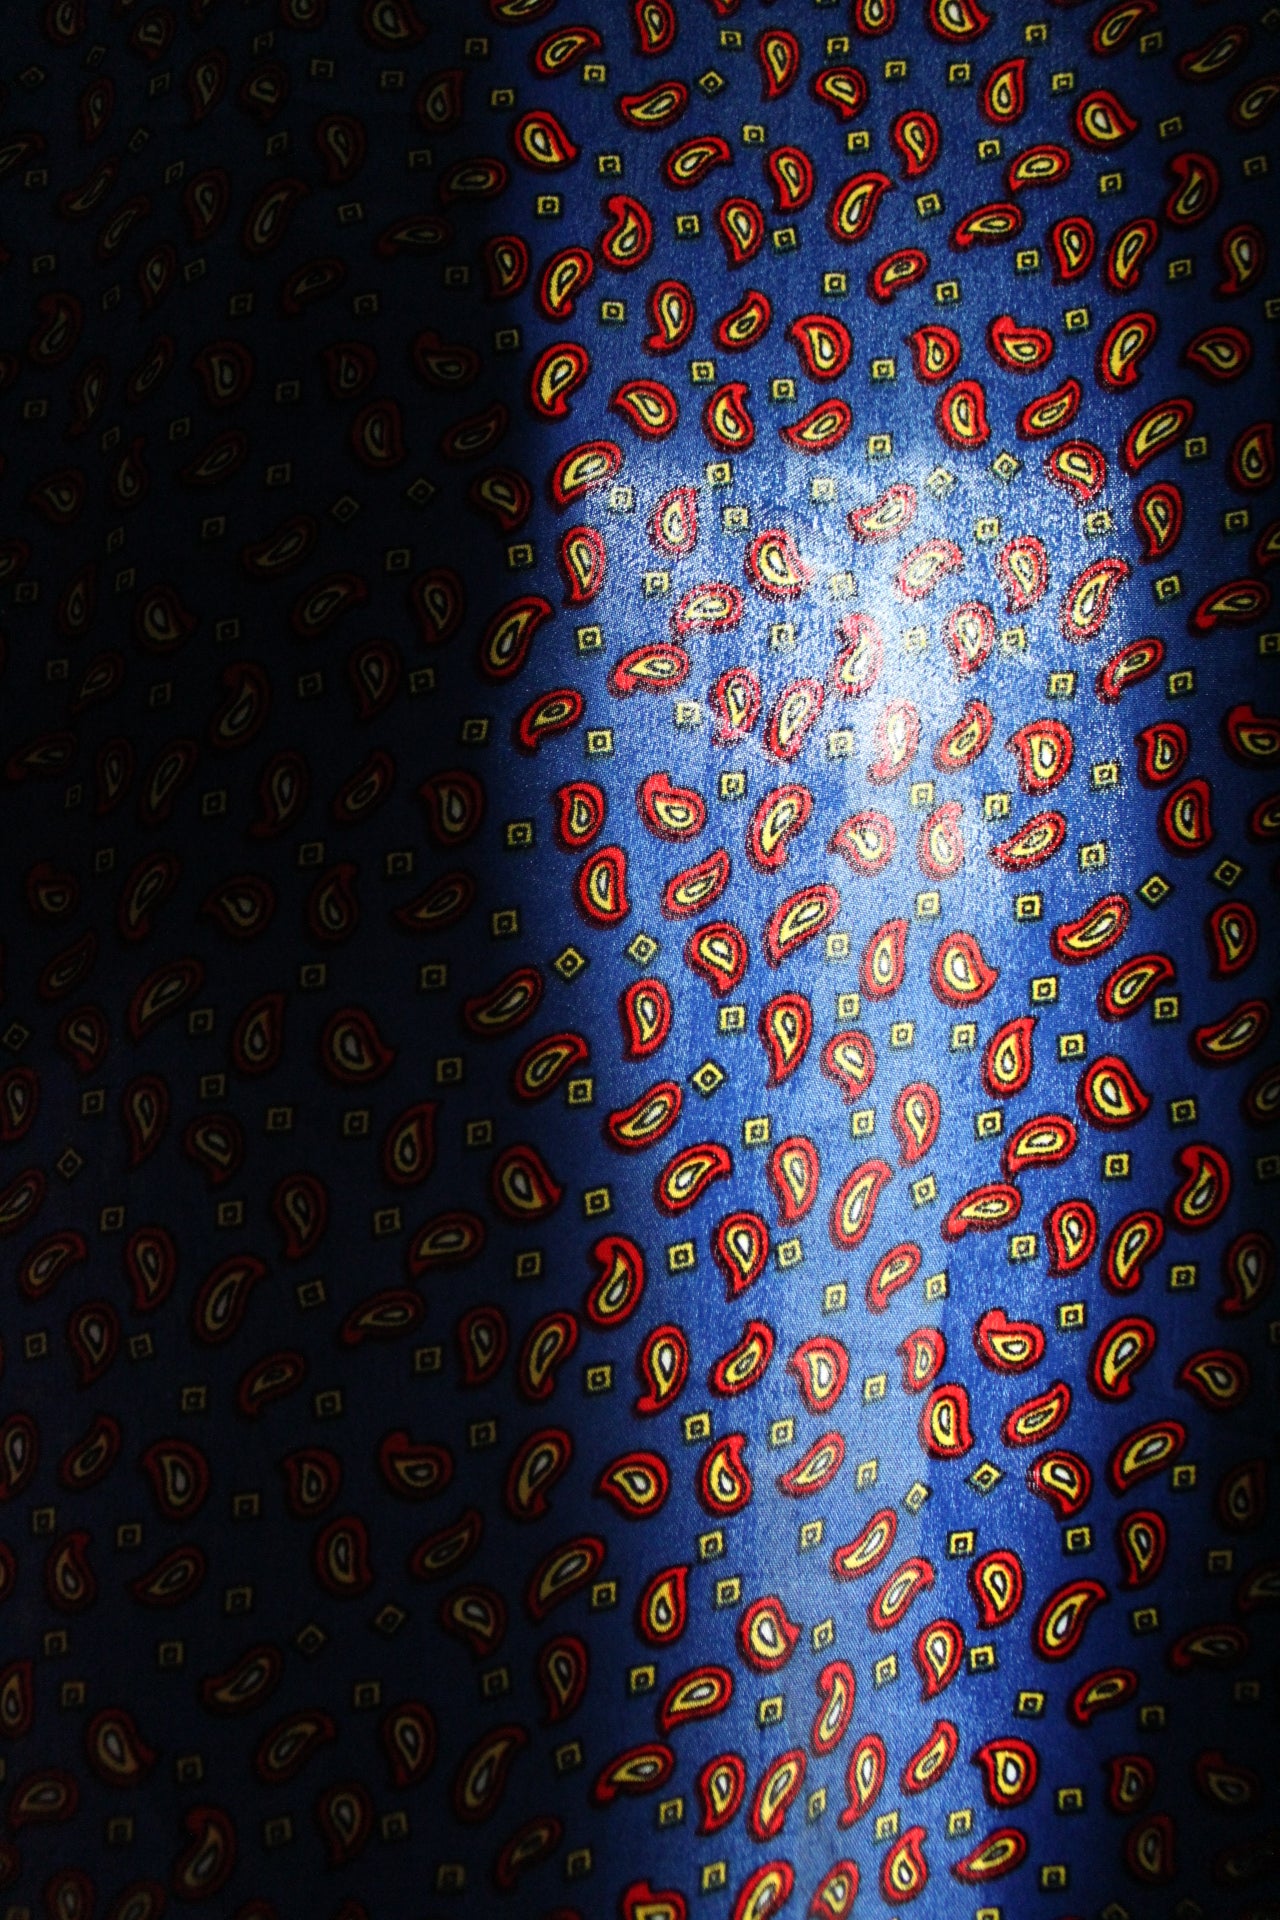 Blue robe with yellow and red paisley